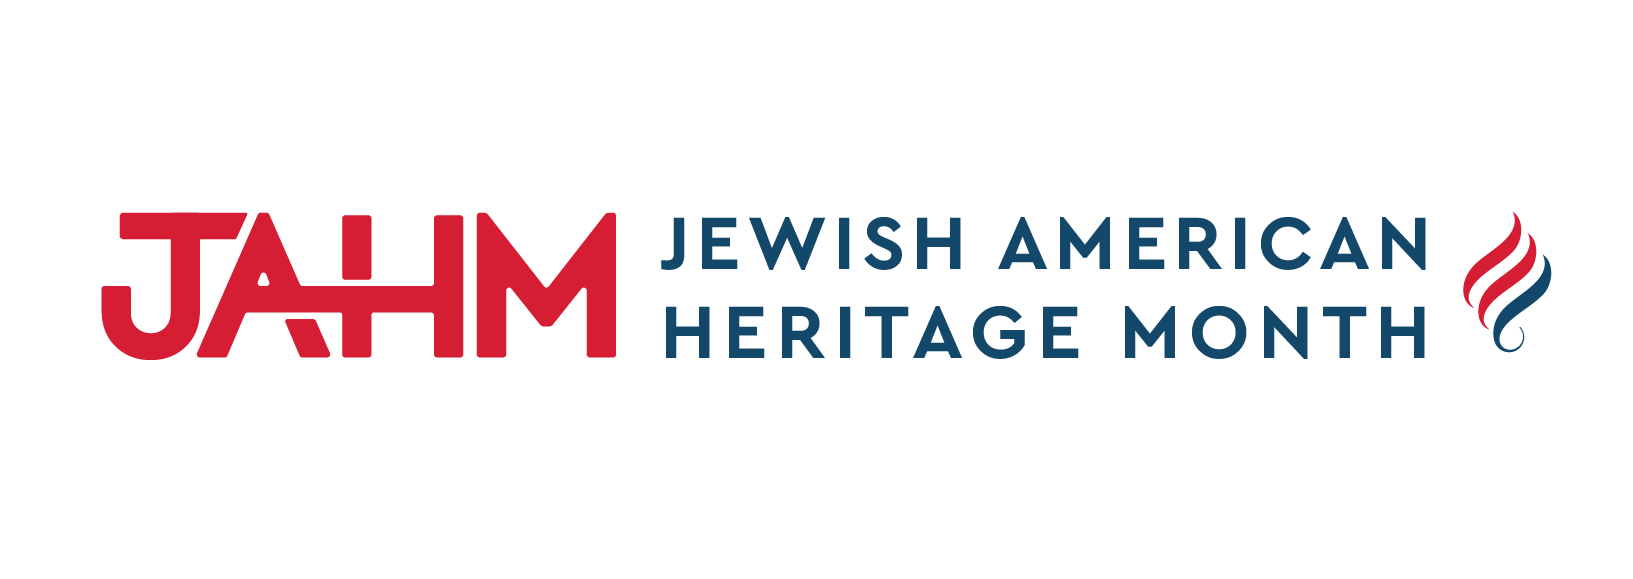 The JHC is a Cultural Partner of Jewish American Heritage Month.